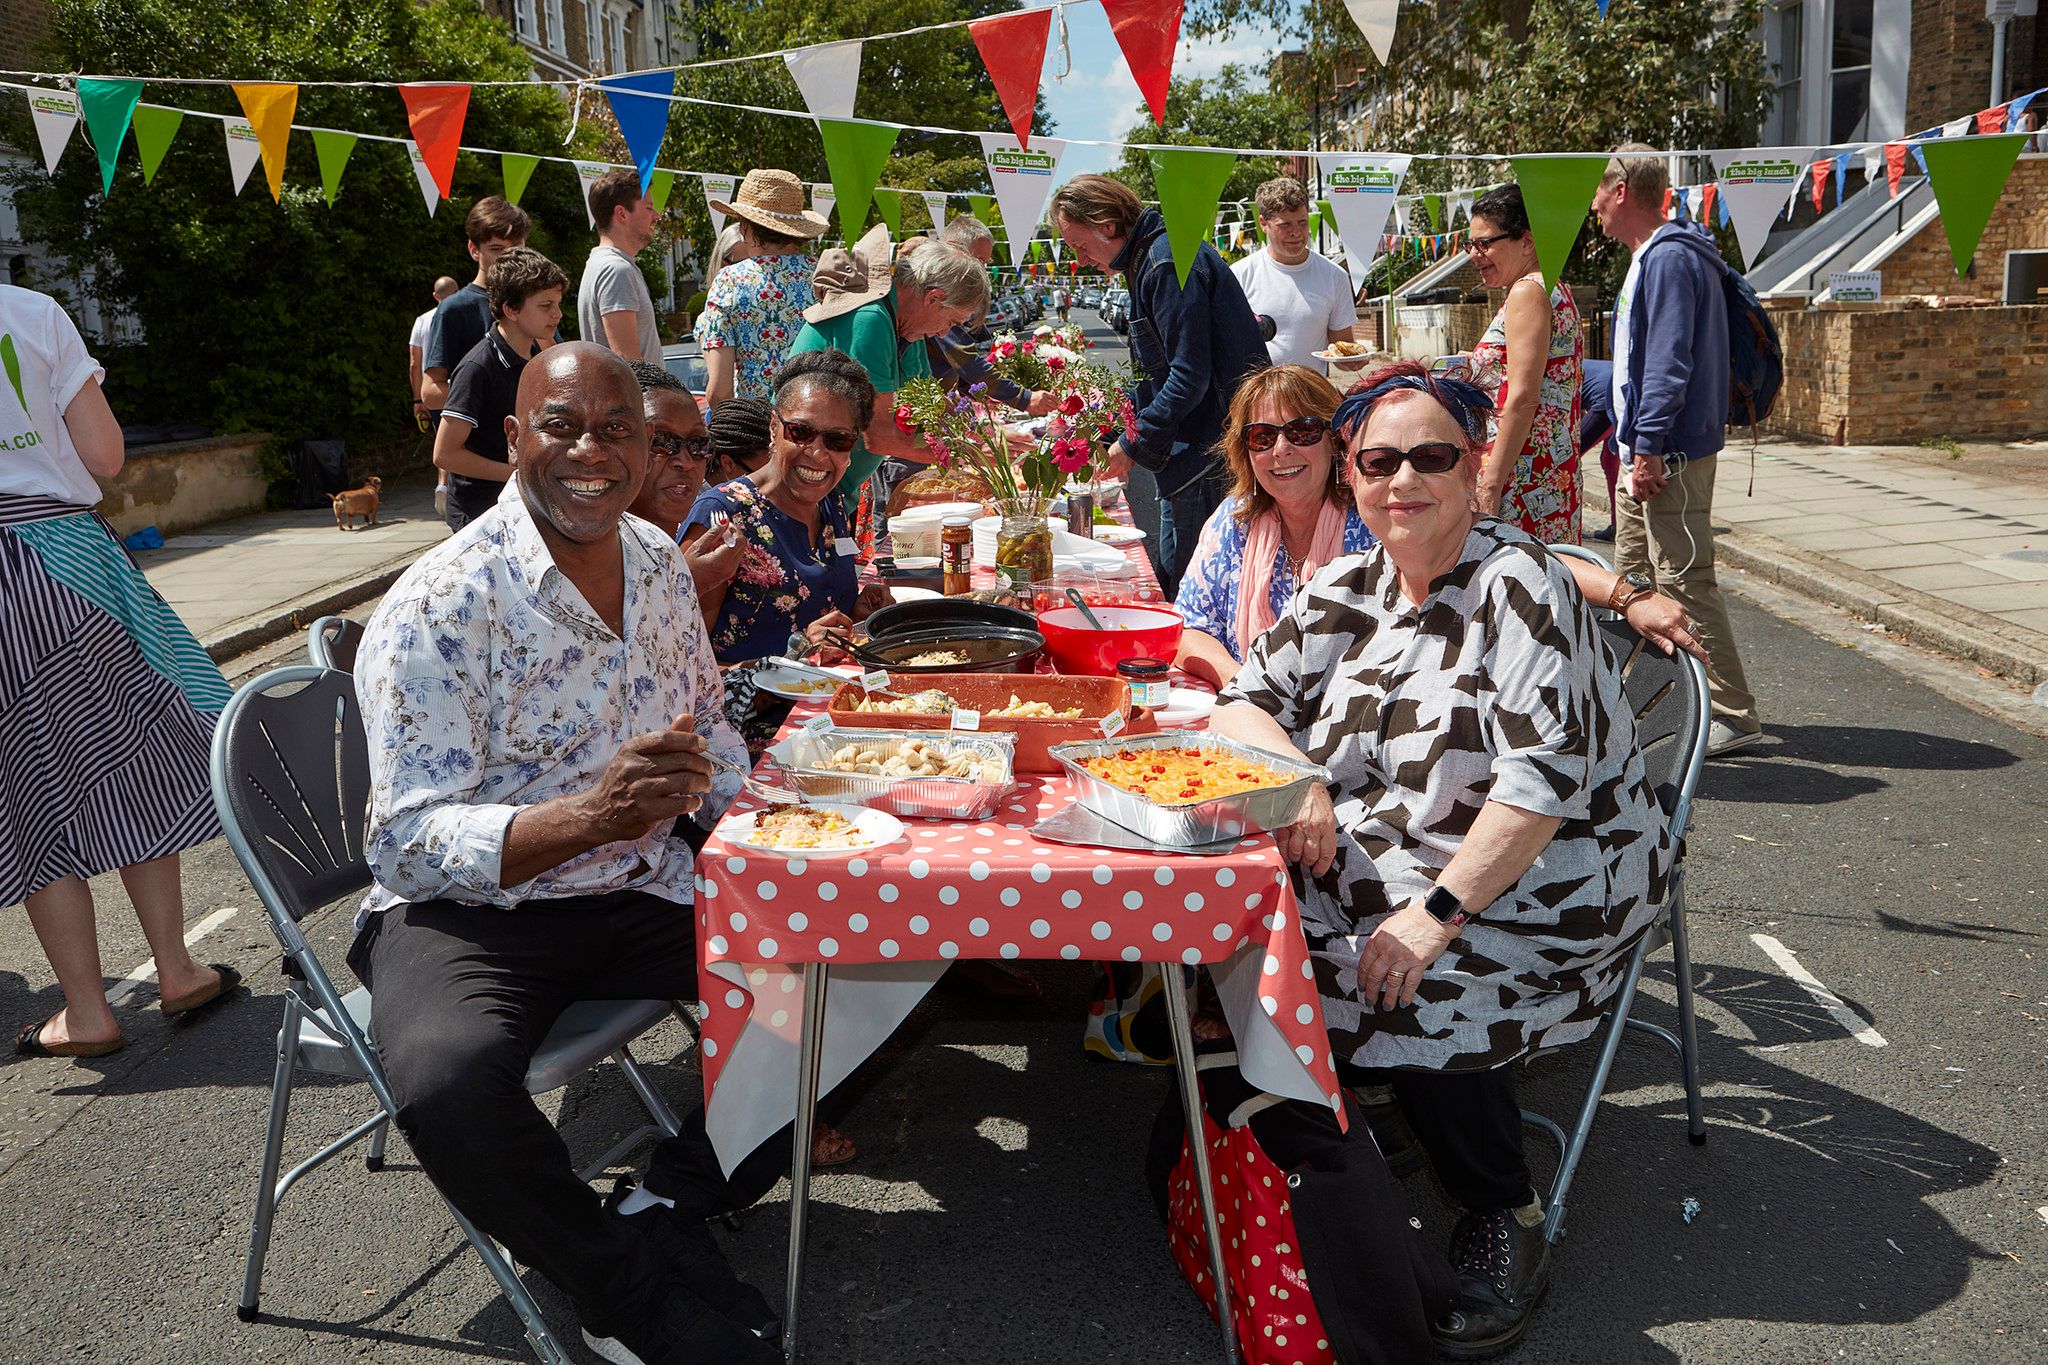 Join millions across the UK to share food, have fun and get to know each other better.